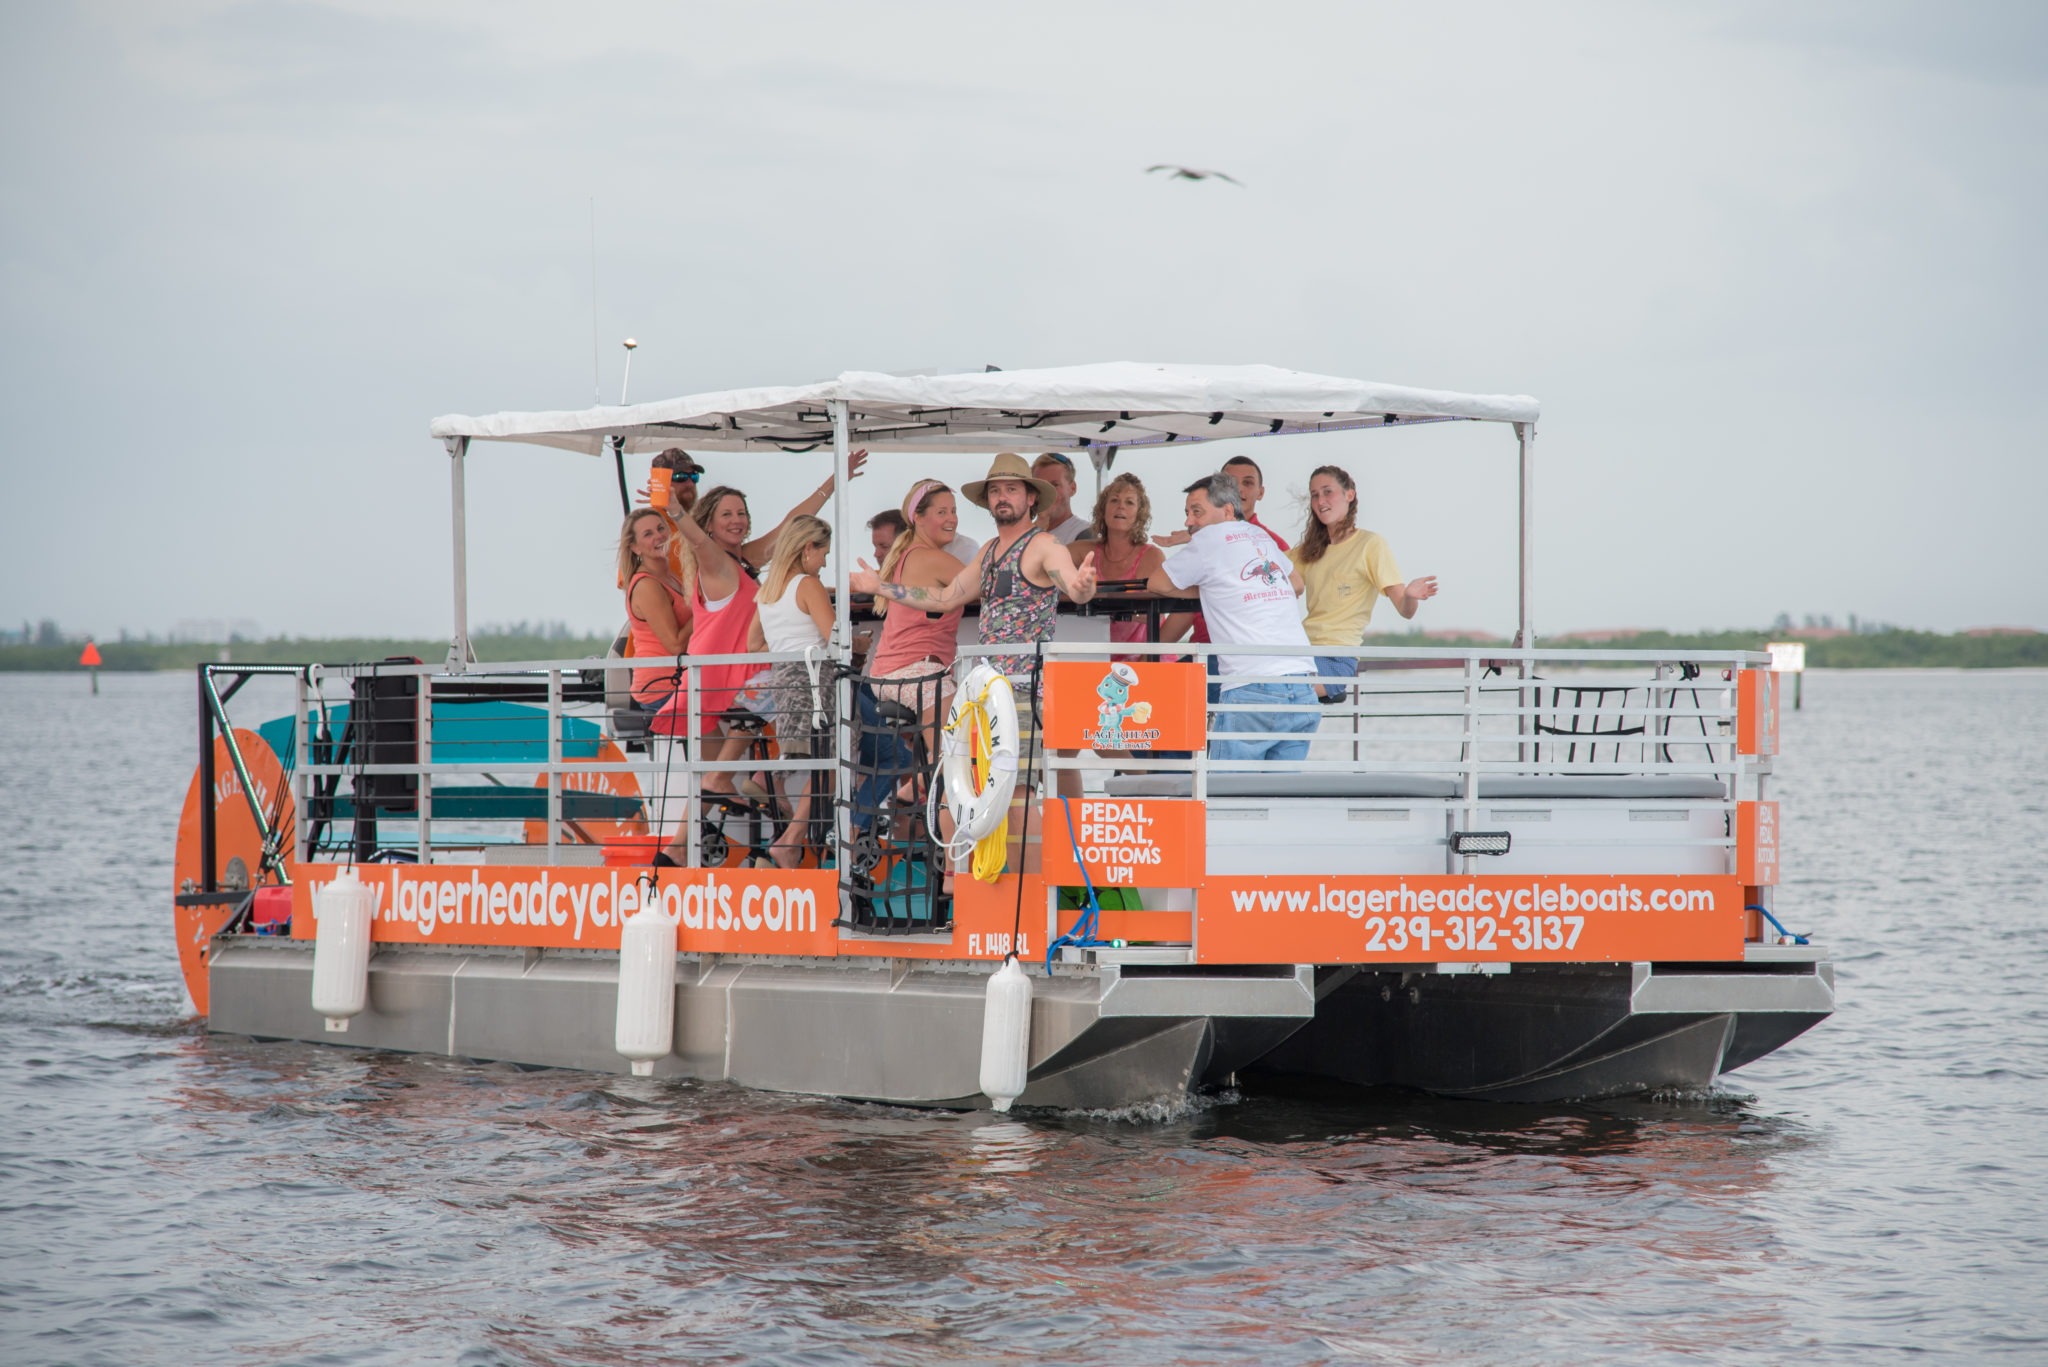 Ft. Myers Boat Rental - Lagerhead Cycleboats - The Ulimate Party Boat